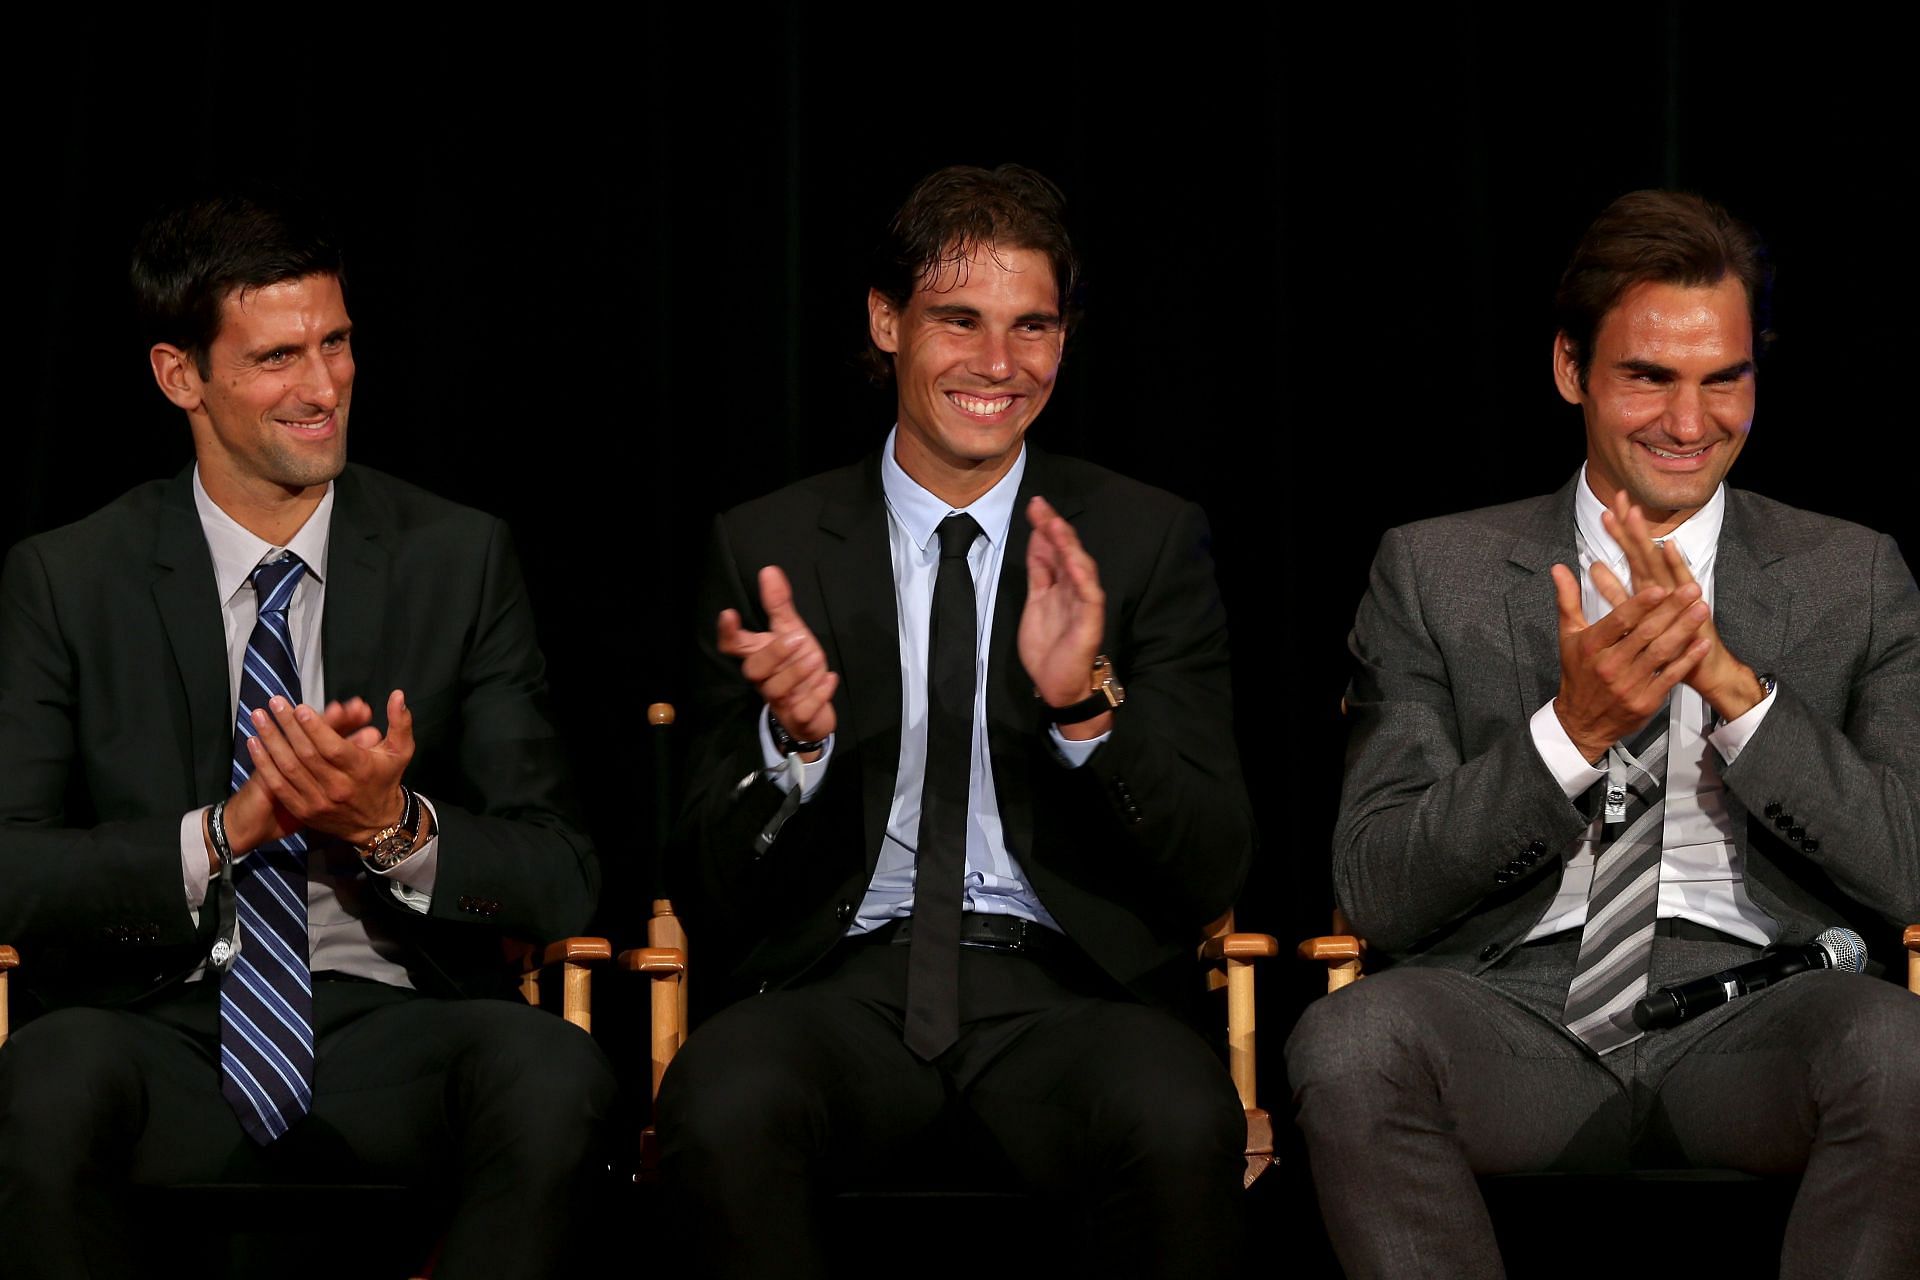 Federer and Djokovic have won considerably more Grand Slam matches than Nadal